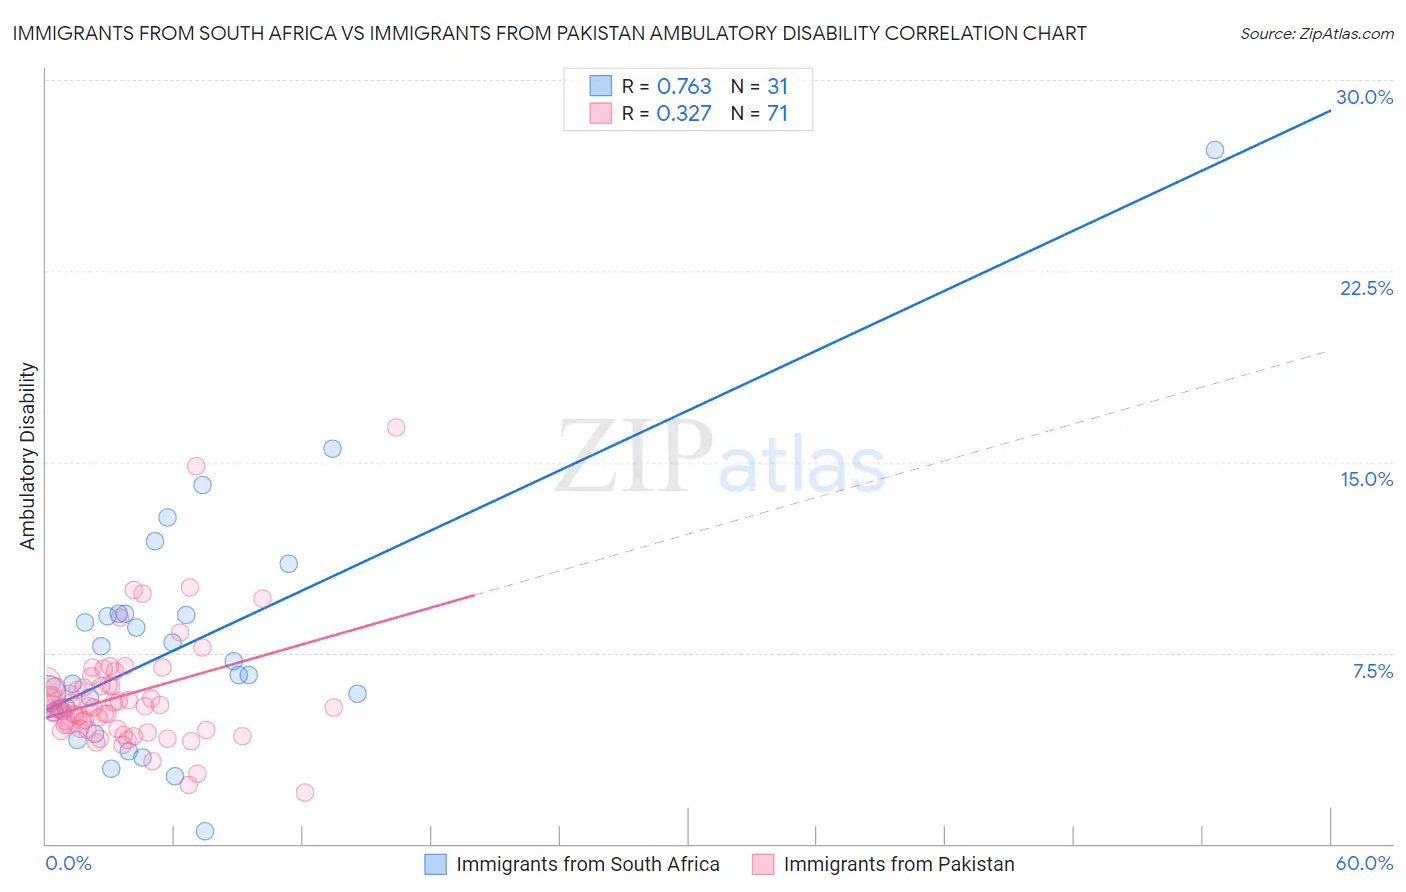 Immigrants from South Africa vs Immigrants from Pakistan Ambulatory Disability